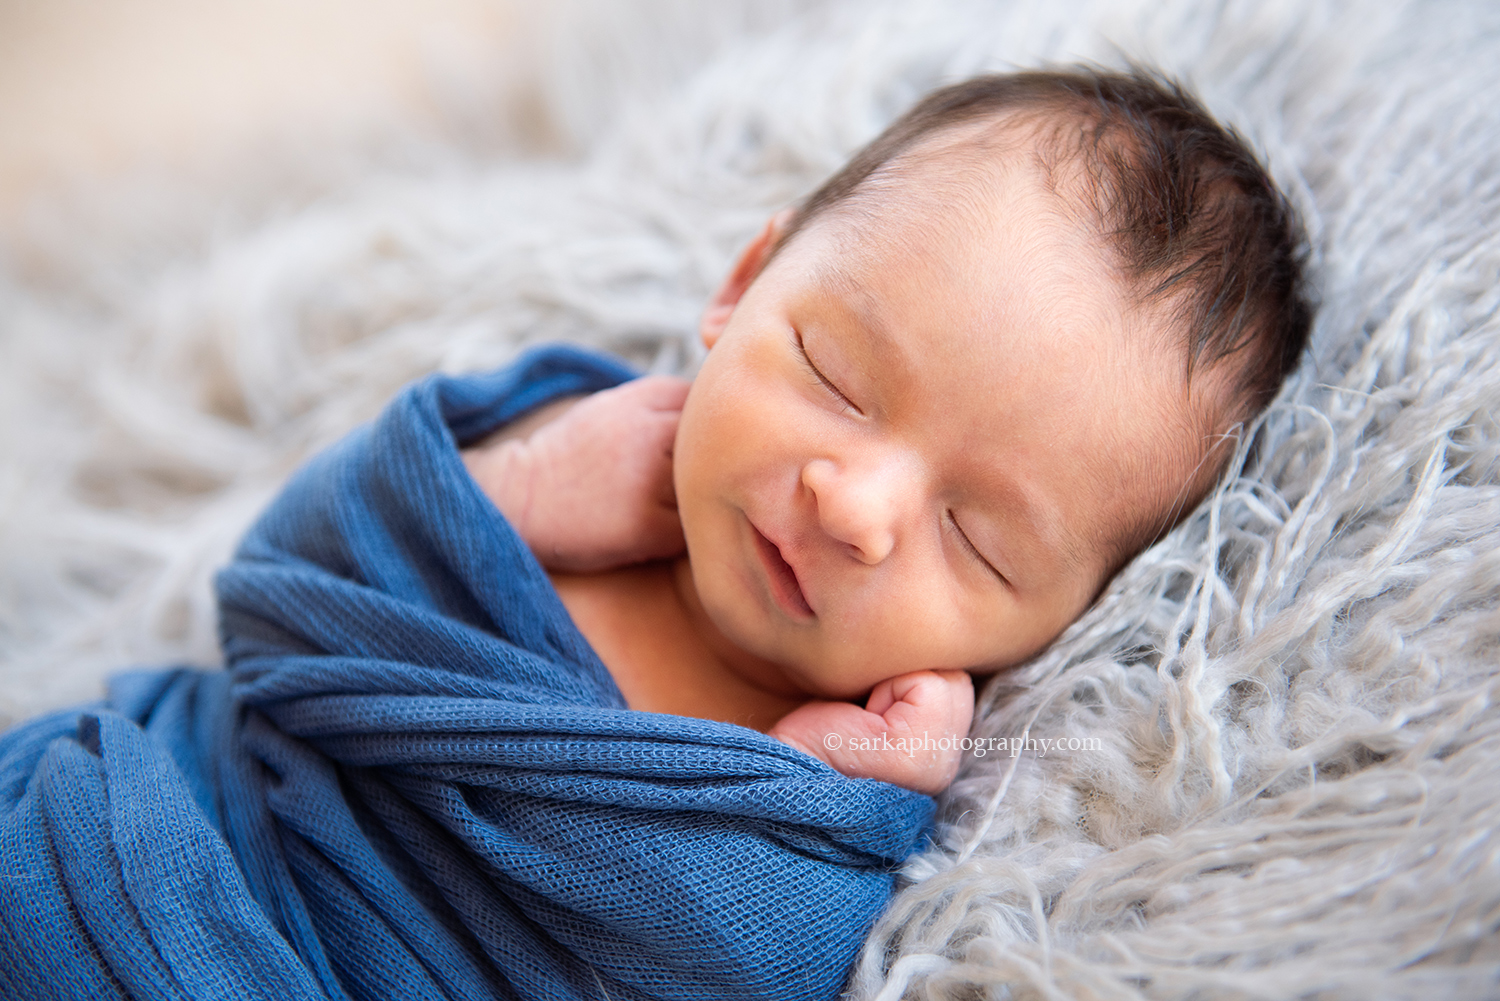 Solvang newborn baby boy smiling when sleeping during his baby portrait session